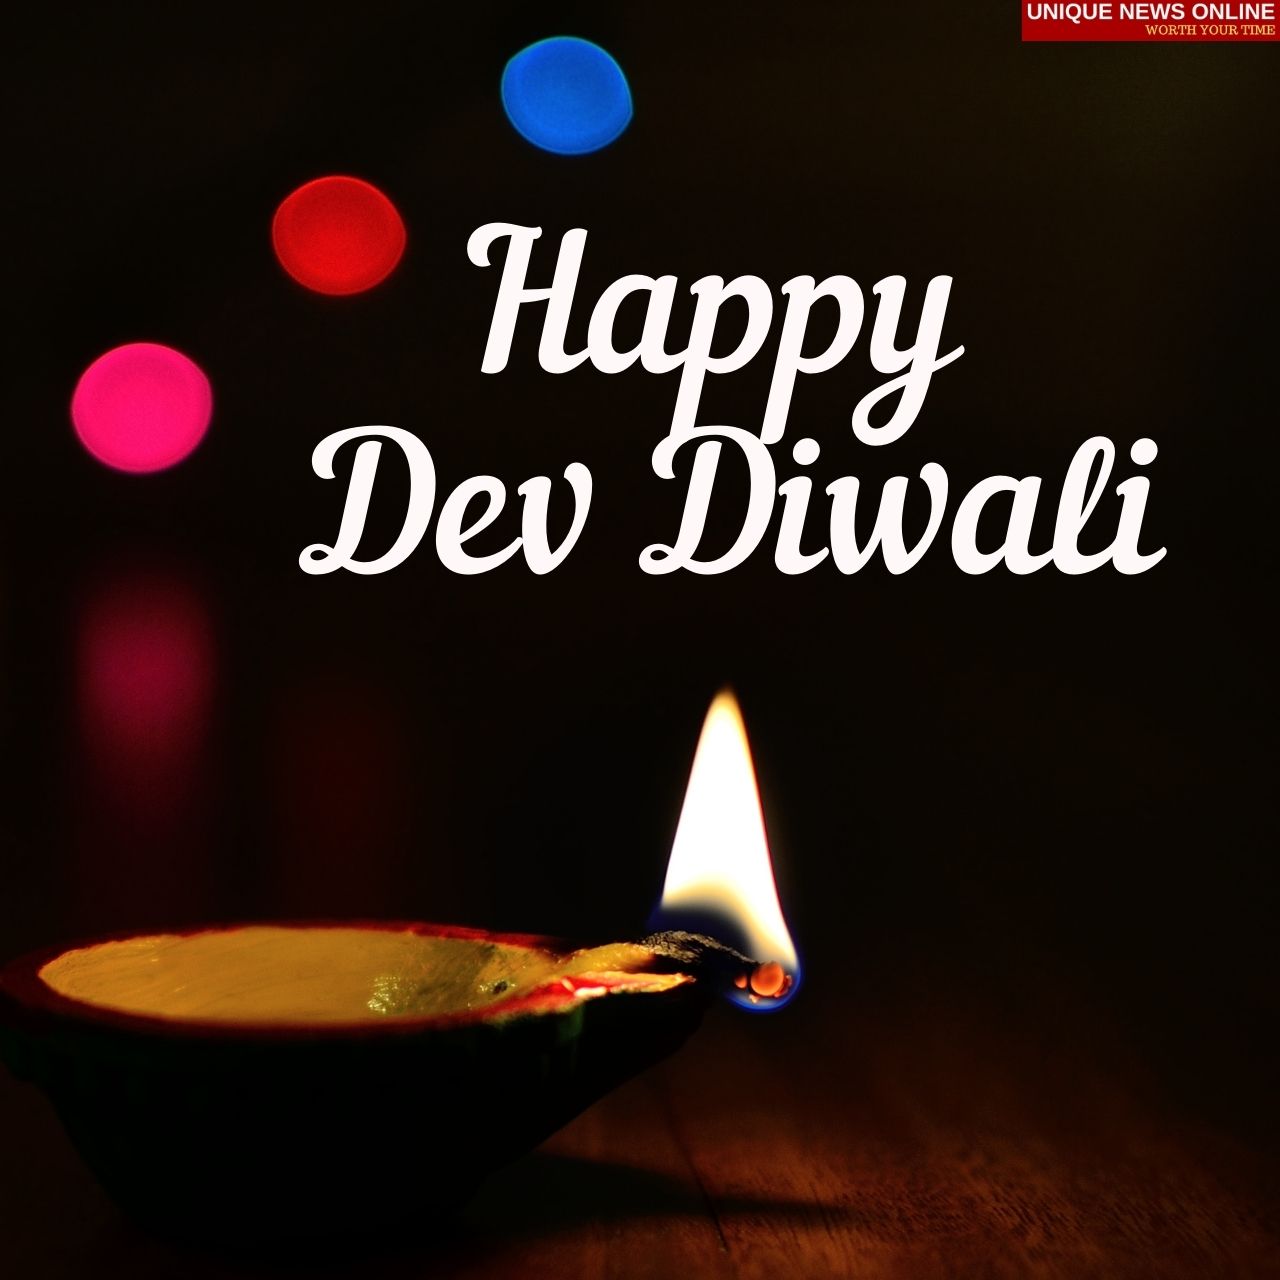 Happy Dev Diwali 2021 Wishes, Quotes, HD Images, Greetings, and Messages to Share